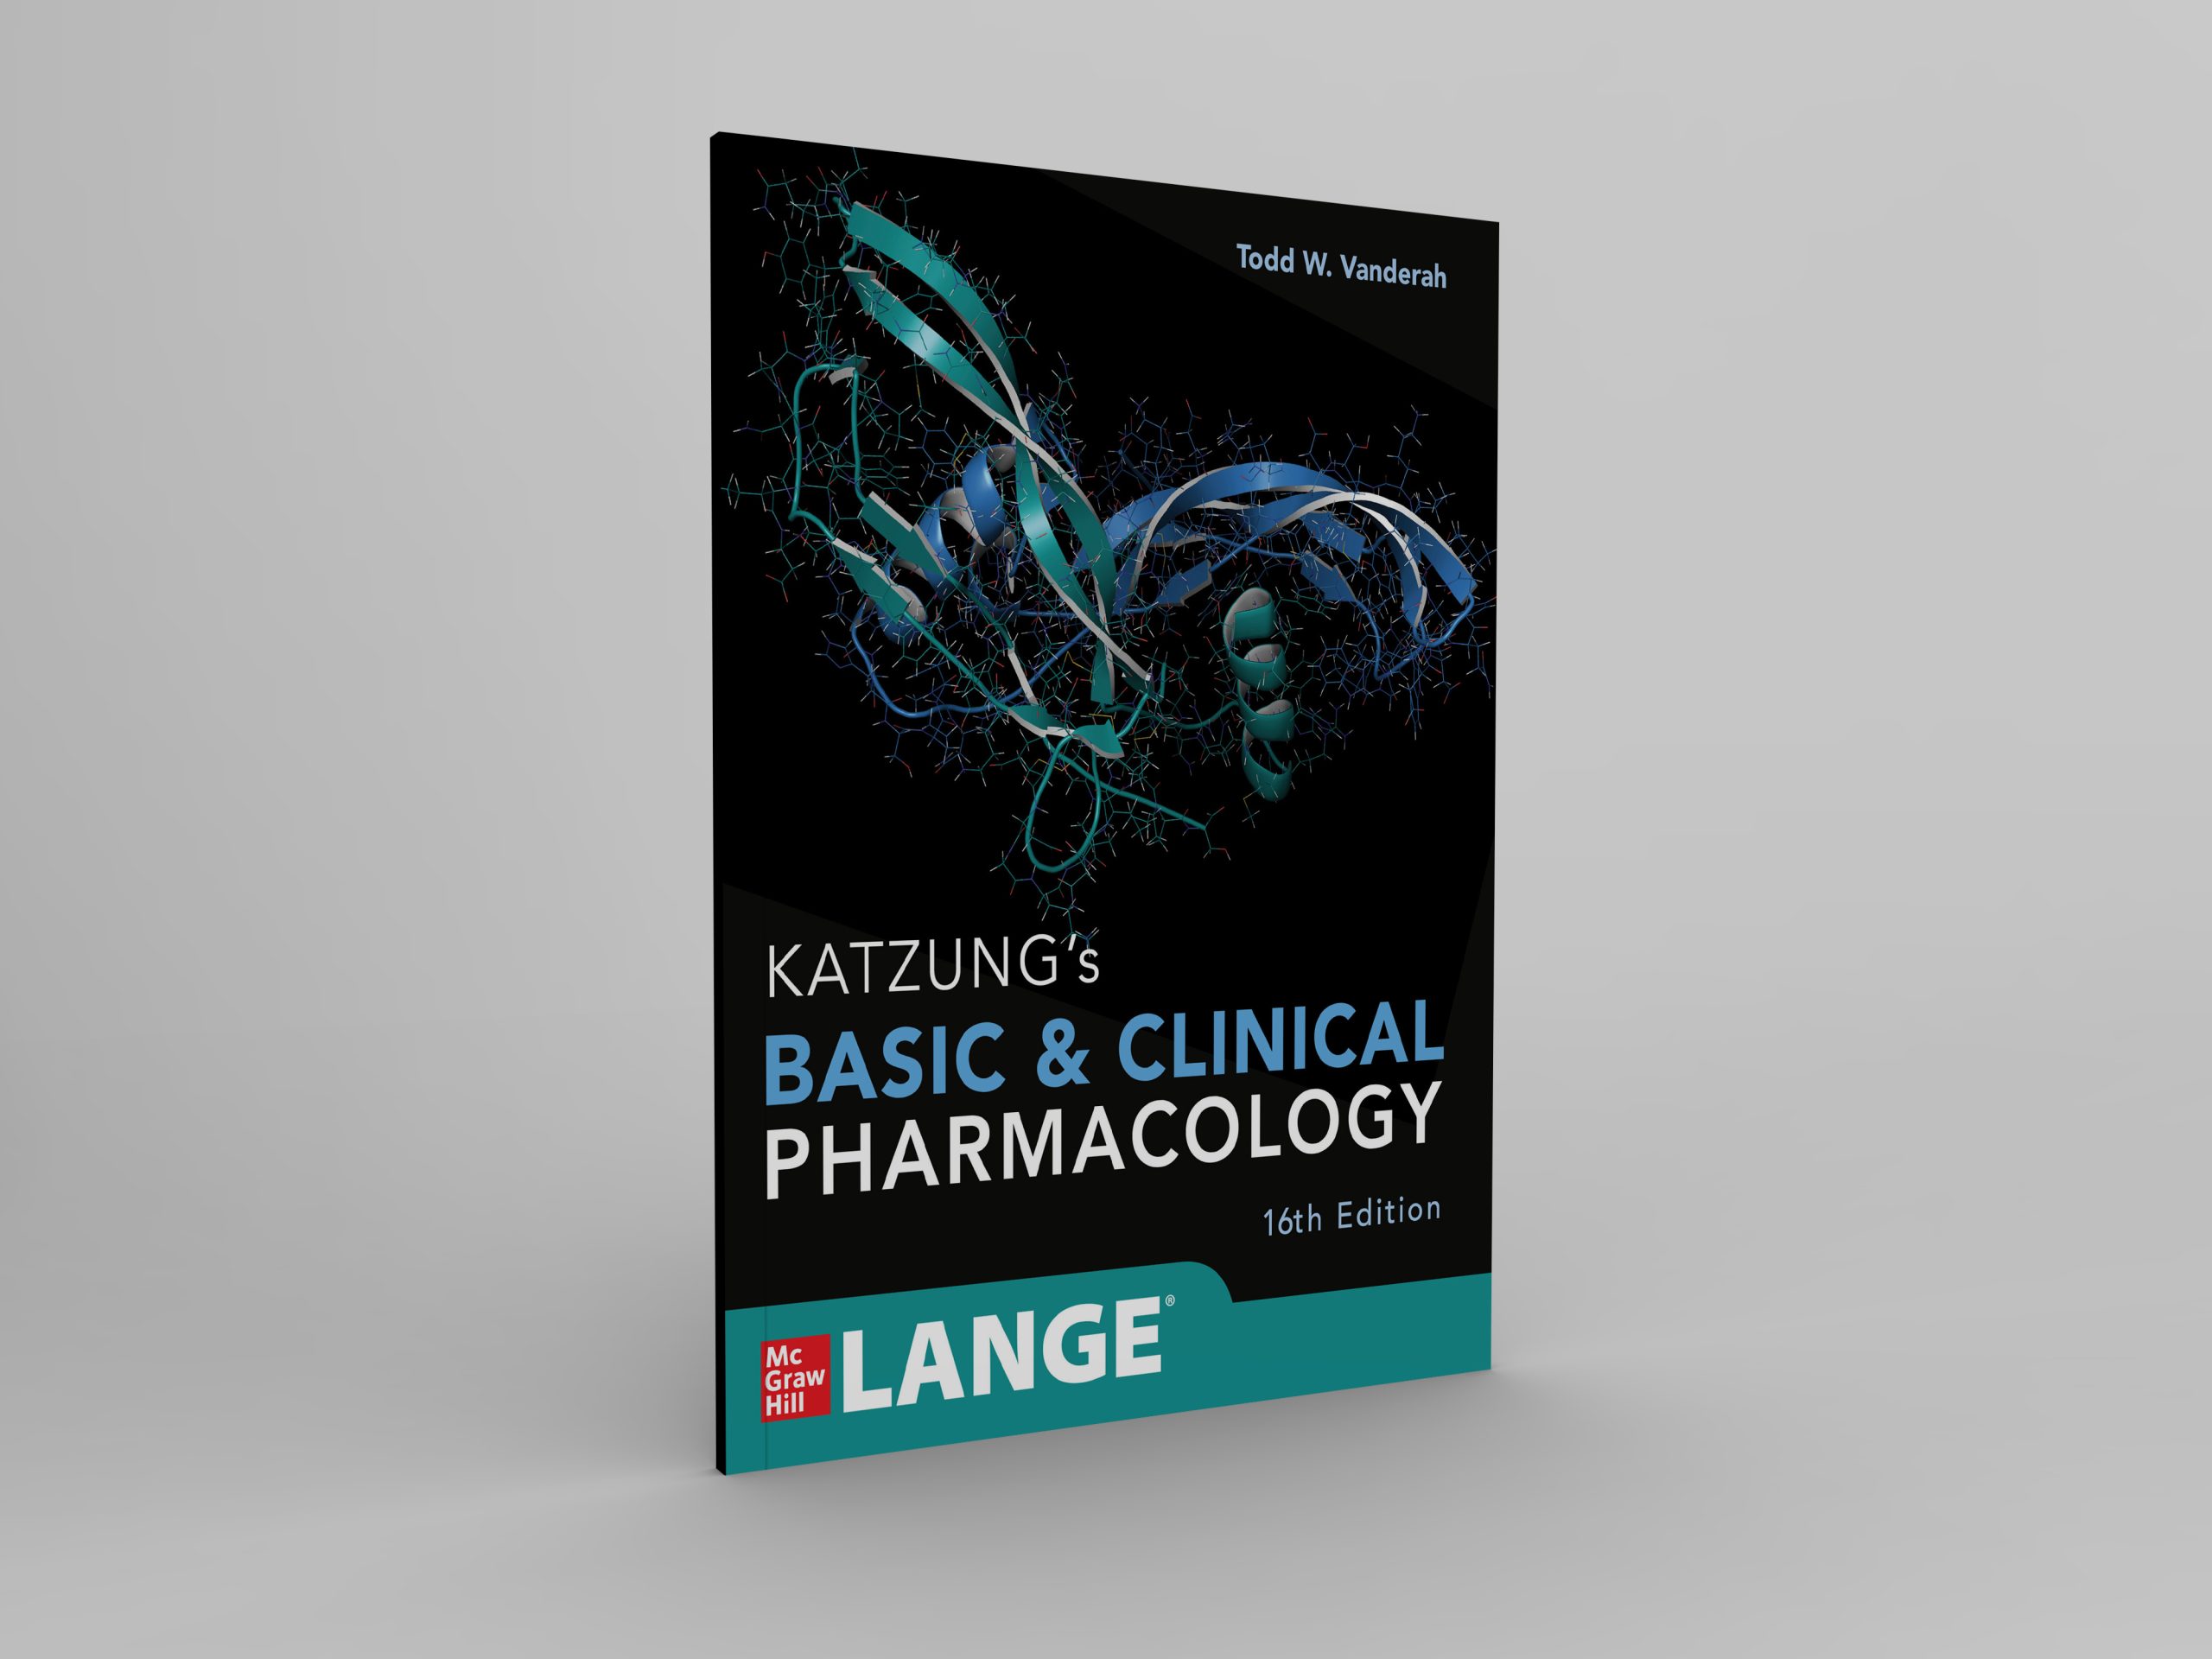 Katzung’s Basic and Clinical Pharmacology, 16th Edition